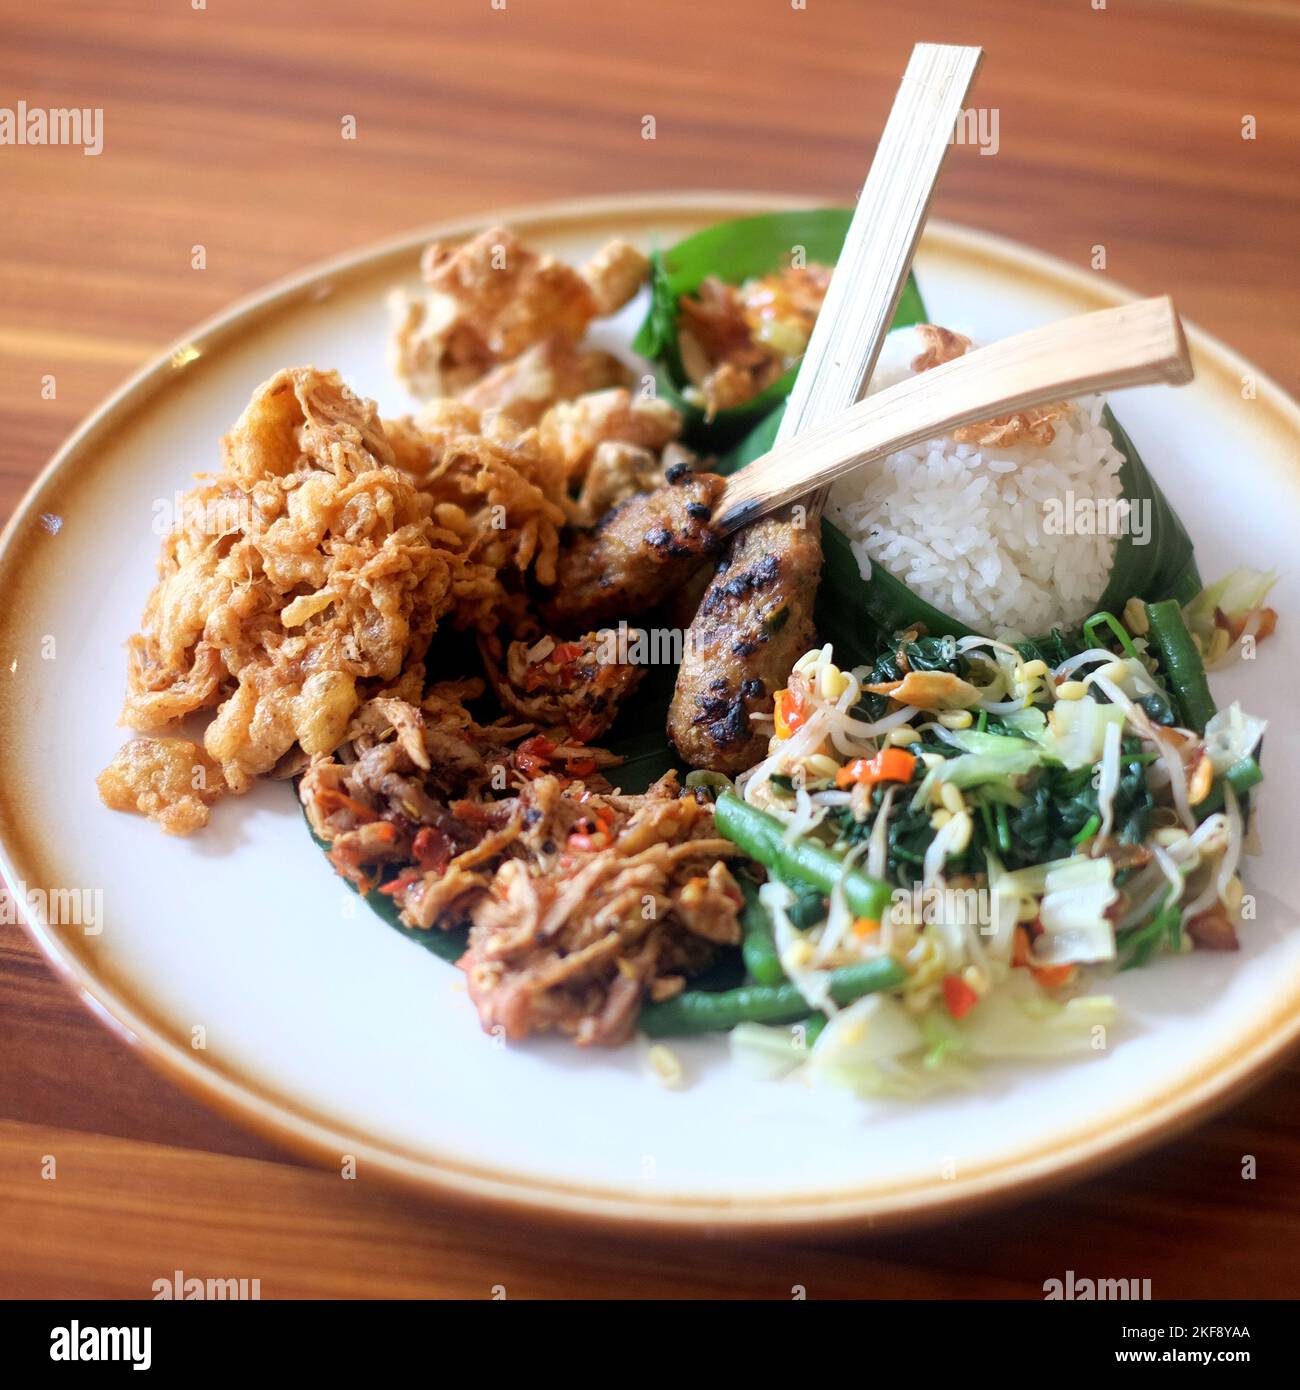 Nasi Campur Bali. Balinese dish of steamed rice with variety of side dishes Stock Photo